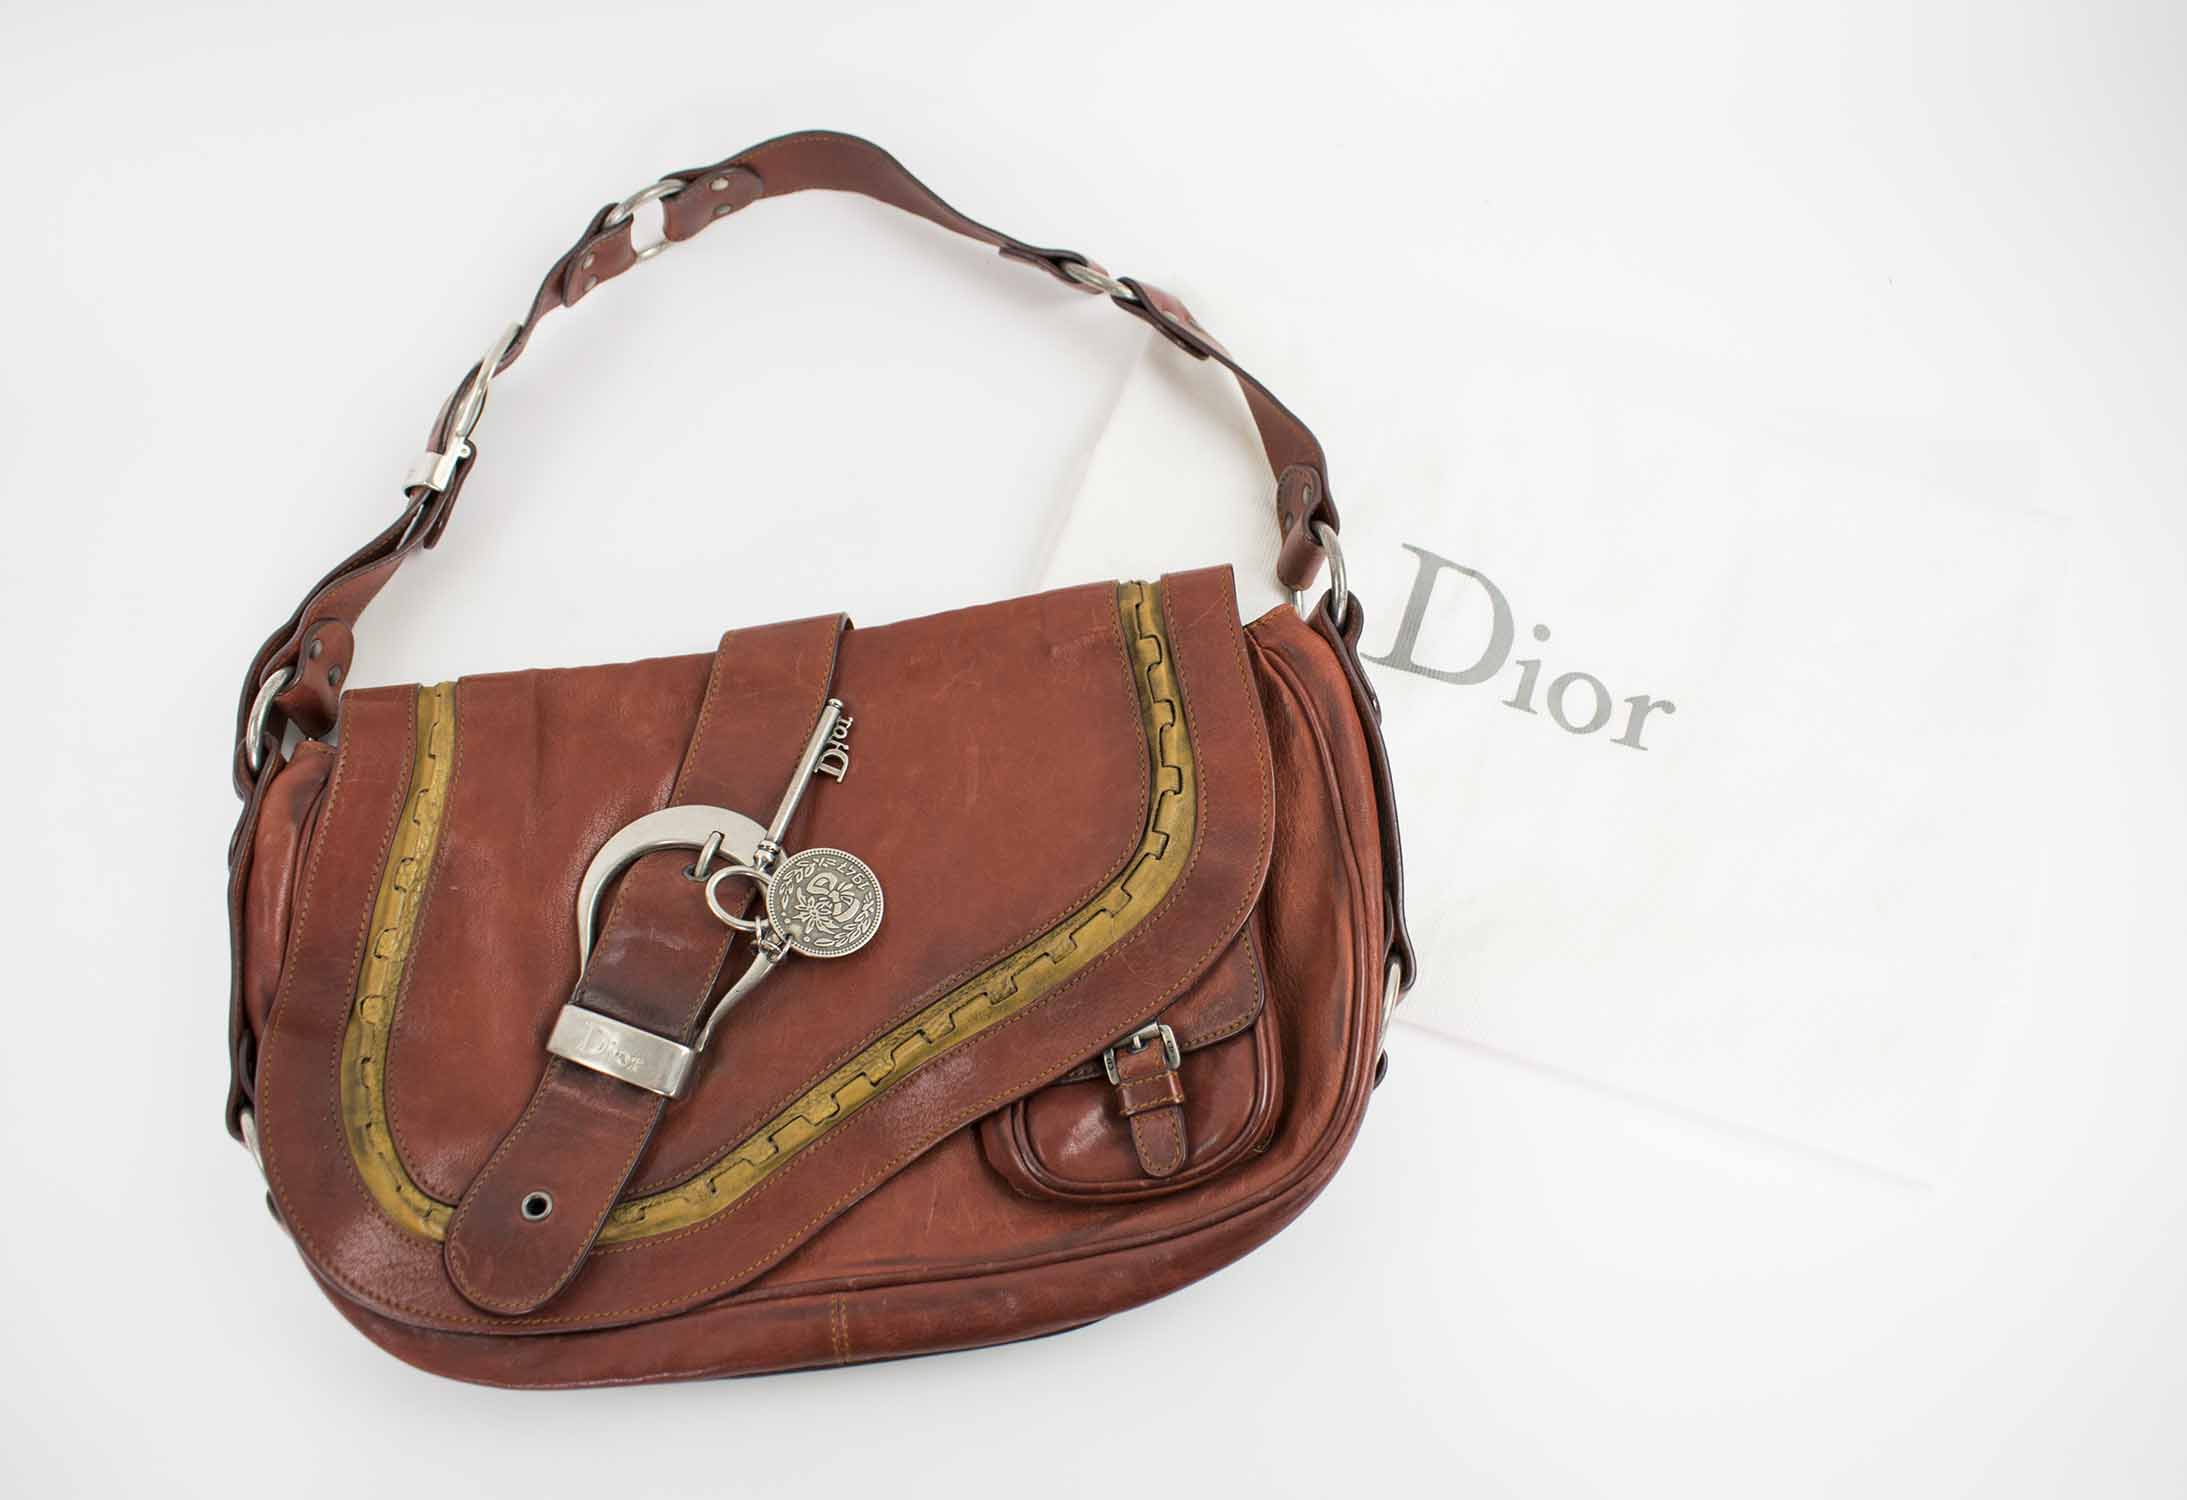 Sold at Auction: Christian Dior Vintage Diorissimo Canvas Crossbody Bag